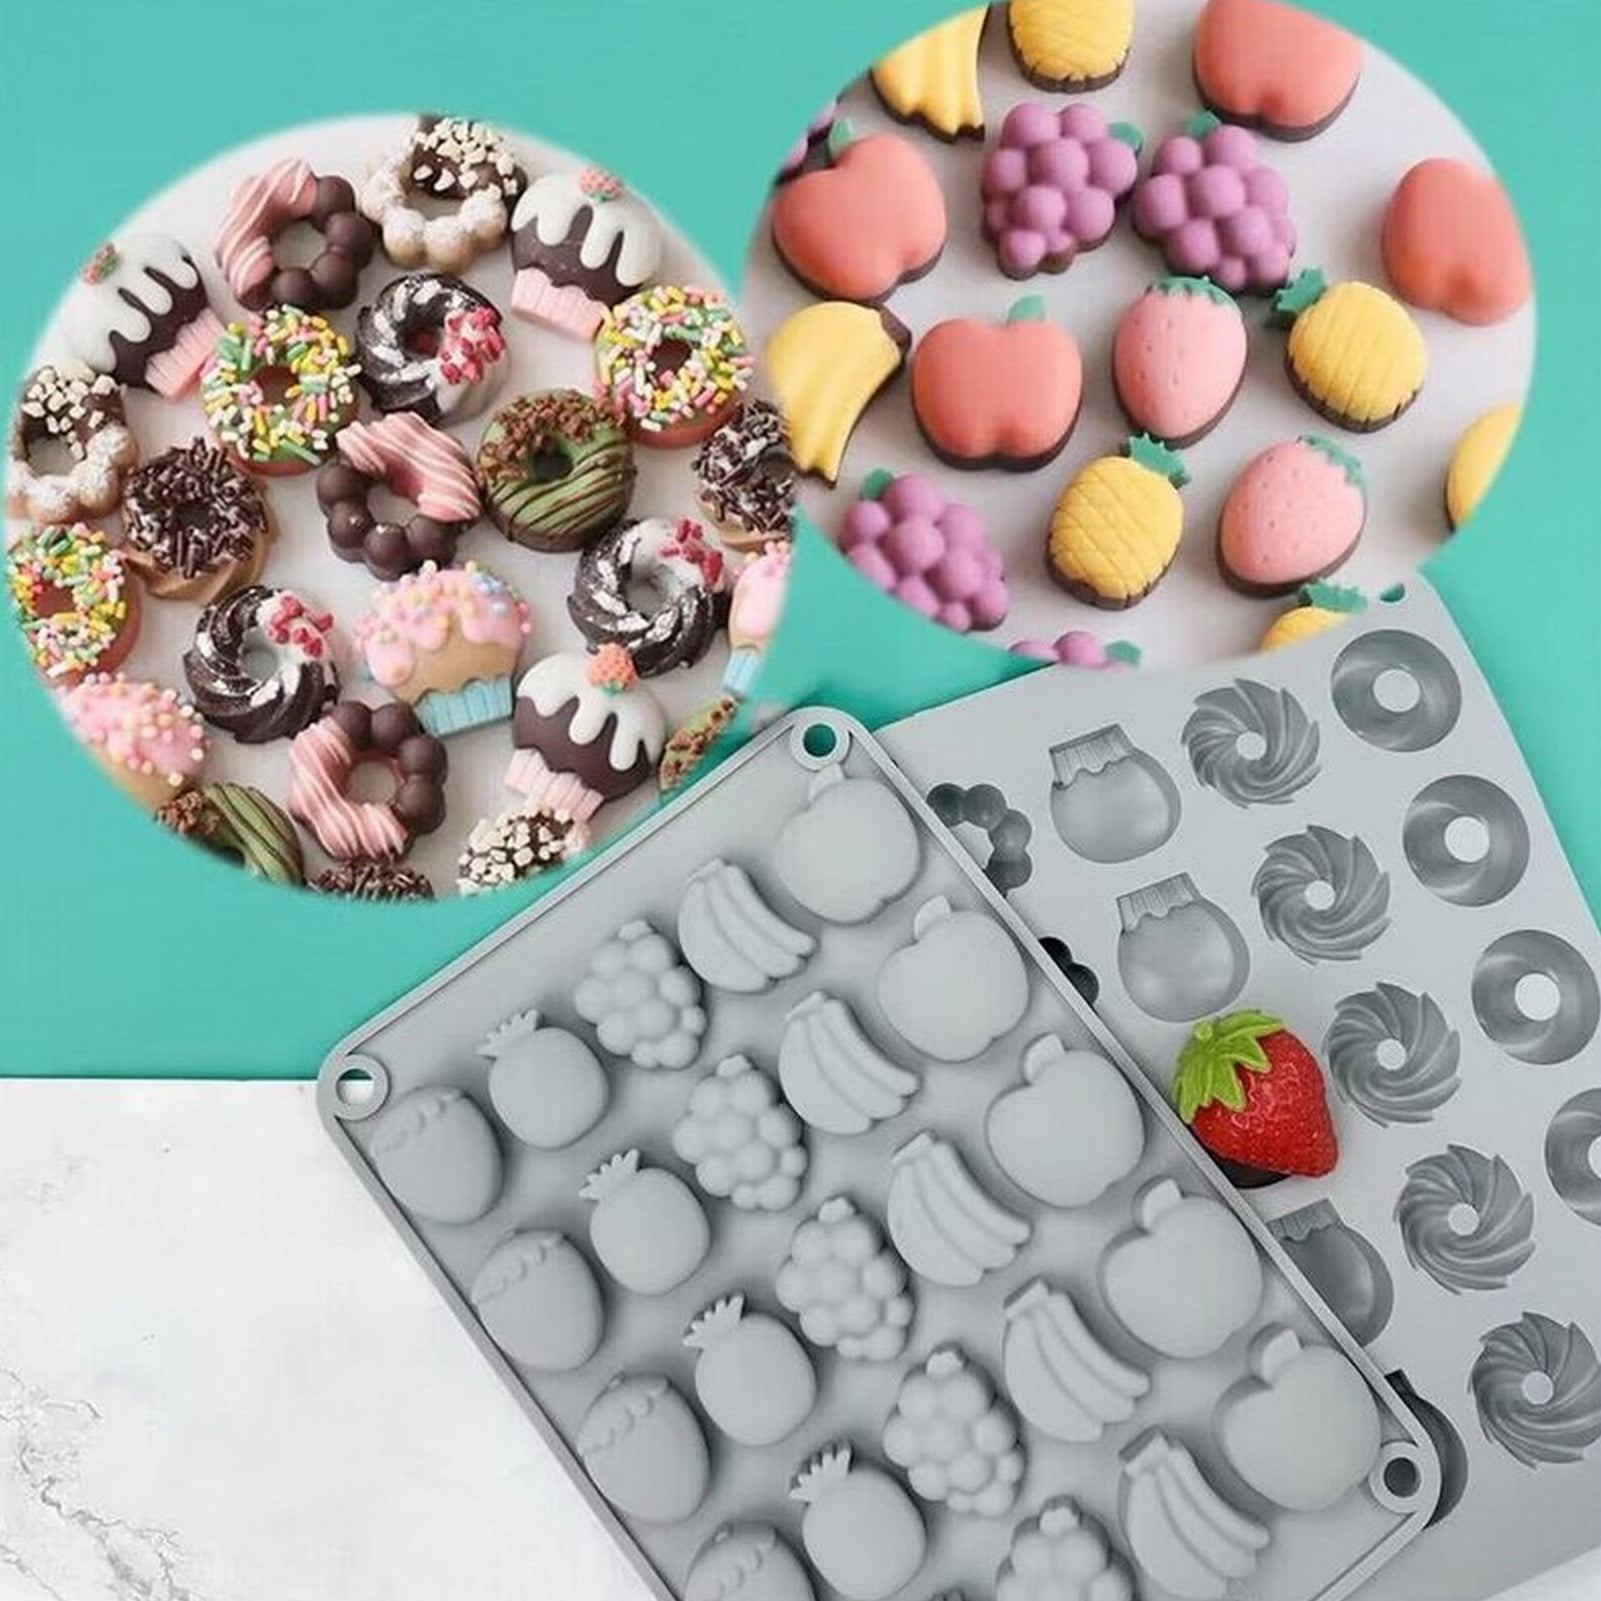 How to Use Silicone Molds with Chocolate, Gummy Candy, and Fondant